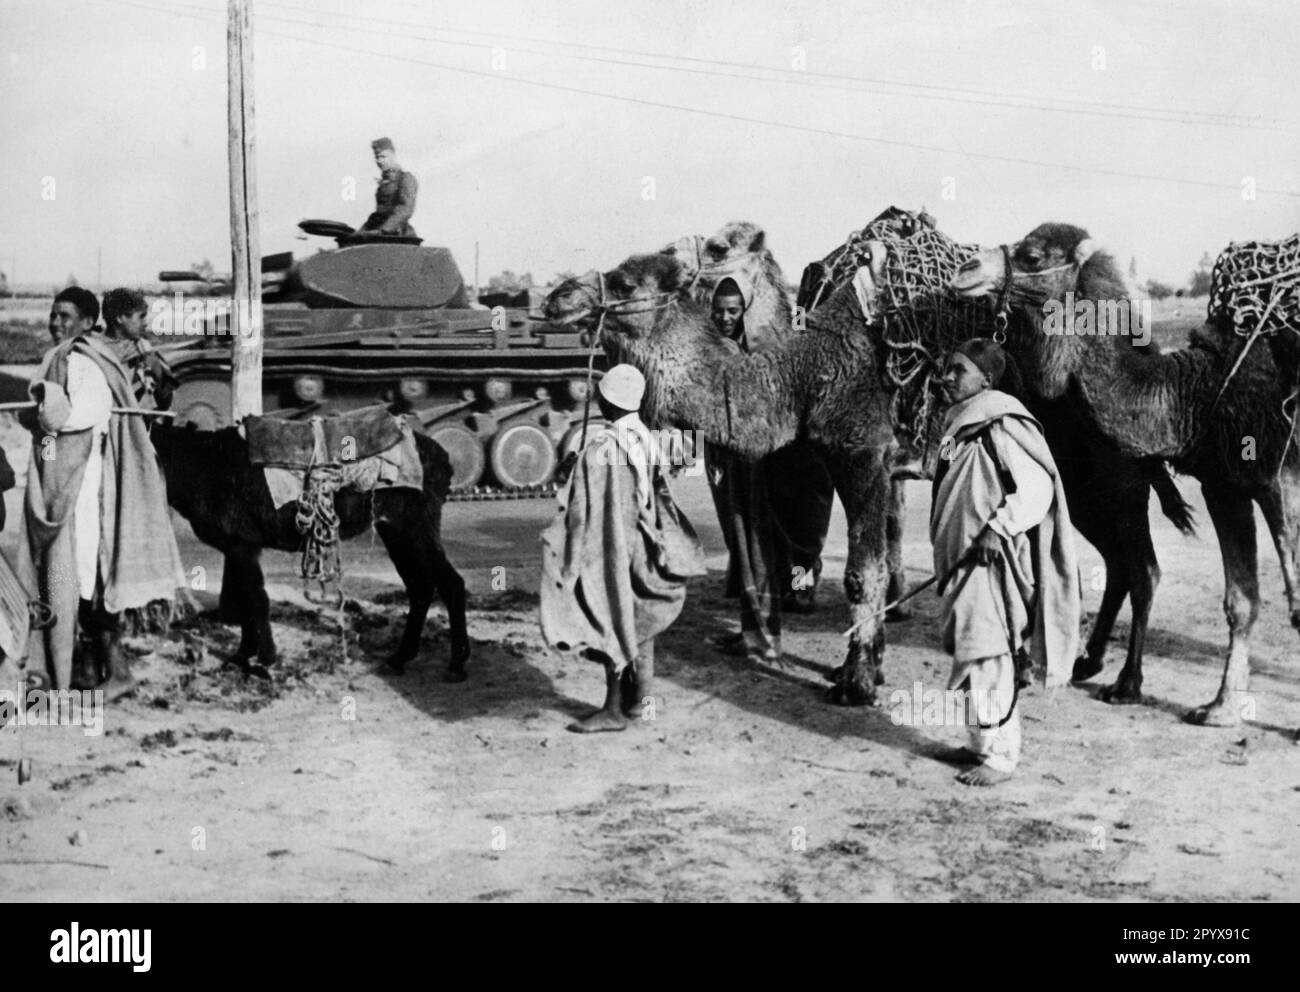 A Panzerkampfwagen II of the German Afrika Korps in Libya. In the foreground are locals with camels. To be seen on the tank: Presumably the tanks in the photo belong to the units that were transferred from the 5th to the 21st Panzer Division. [automated translation] Stock Photo